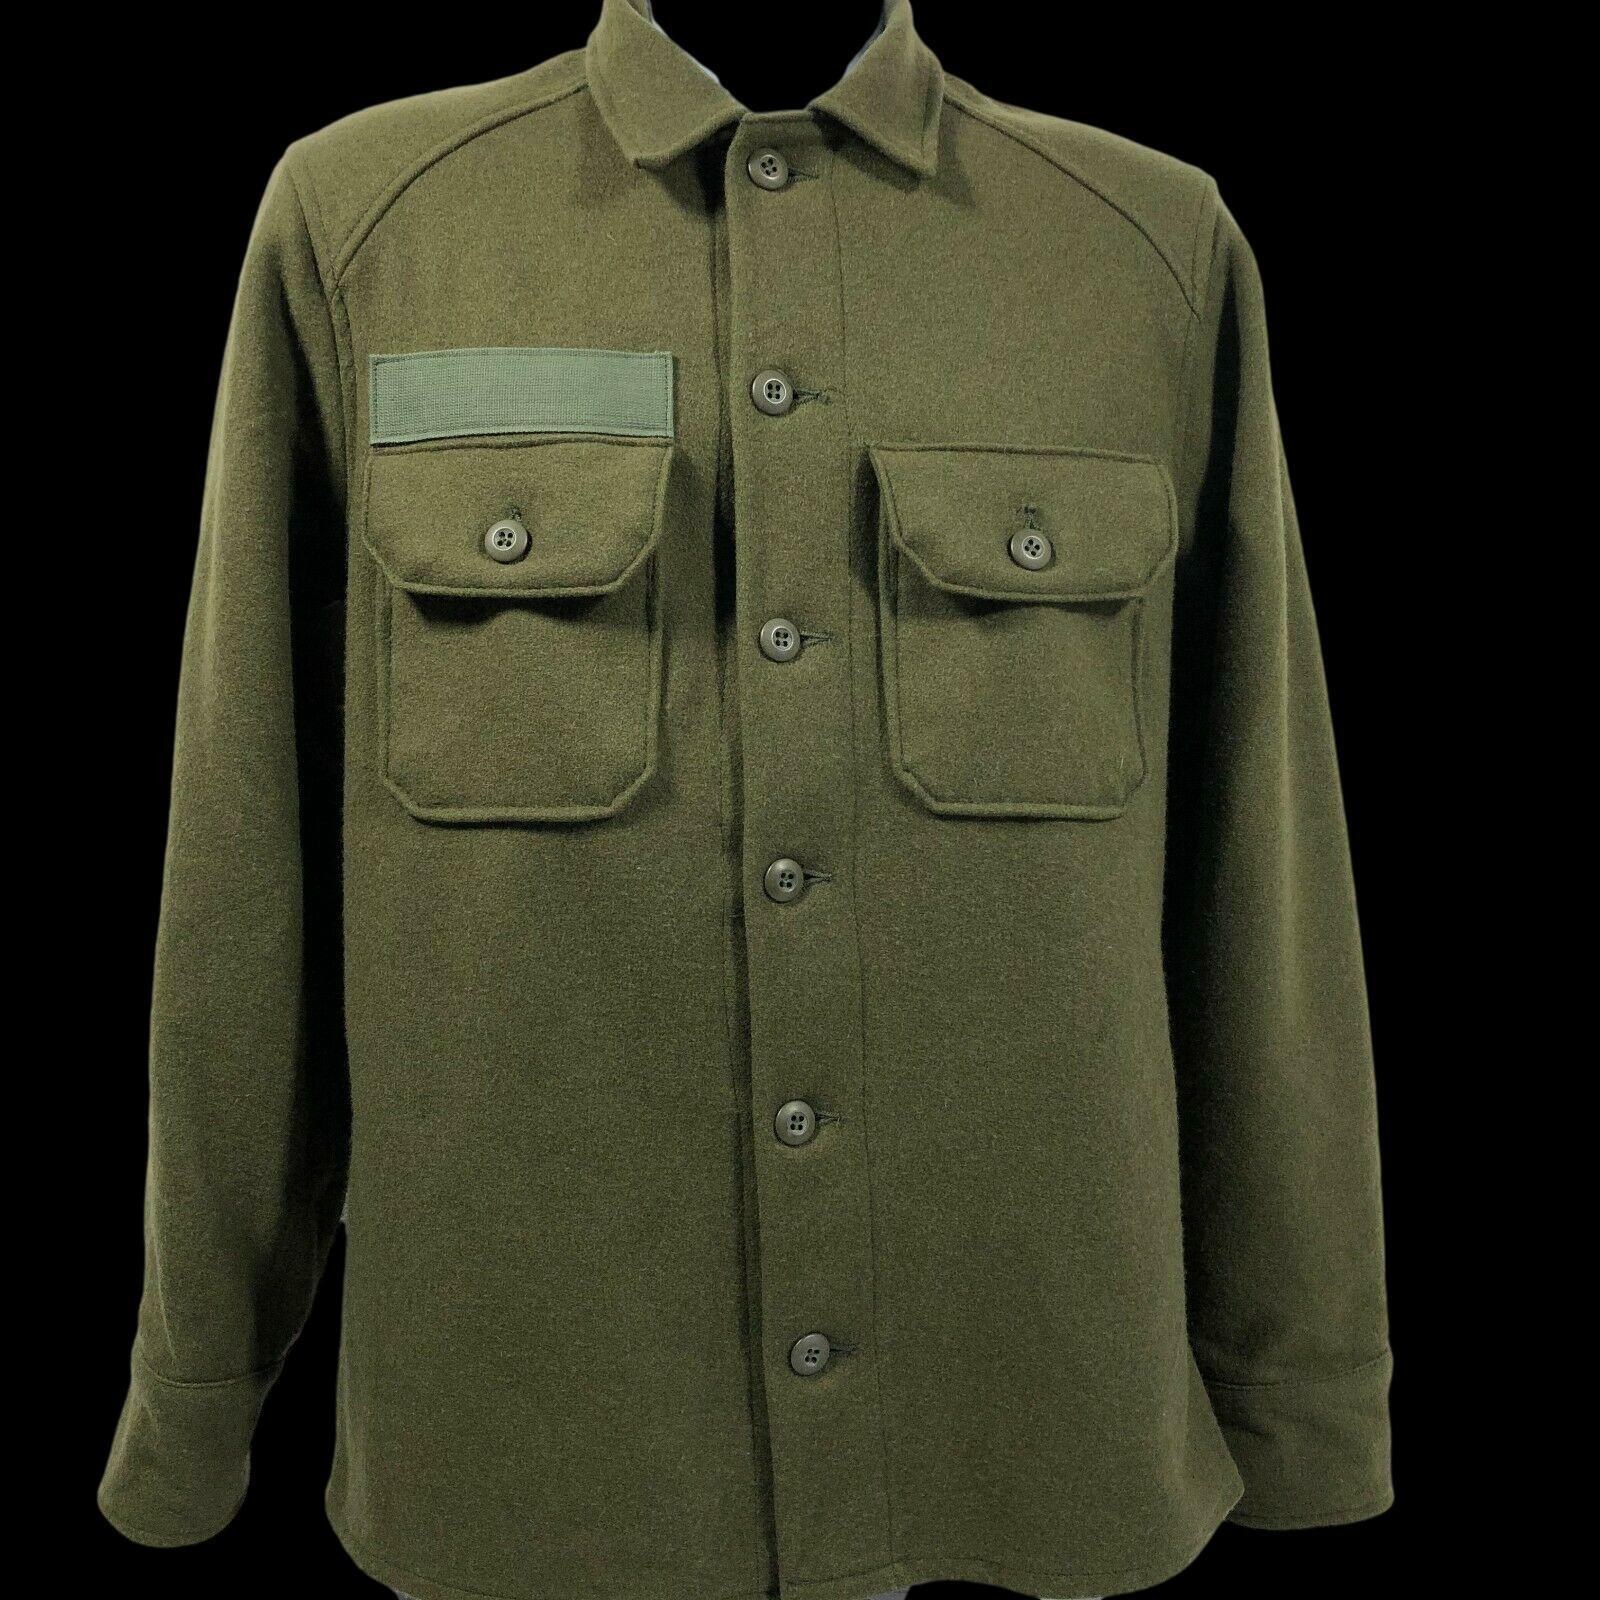 U.S MILITARY WOOL SHIRT ARMY COLD WEATHER SIZE X-SMALL NEW 1977 VINTAGE